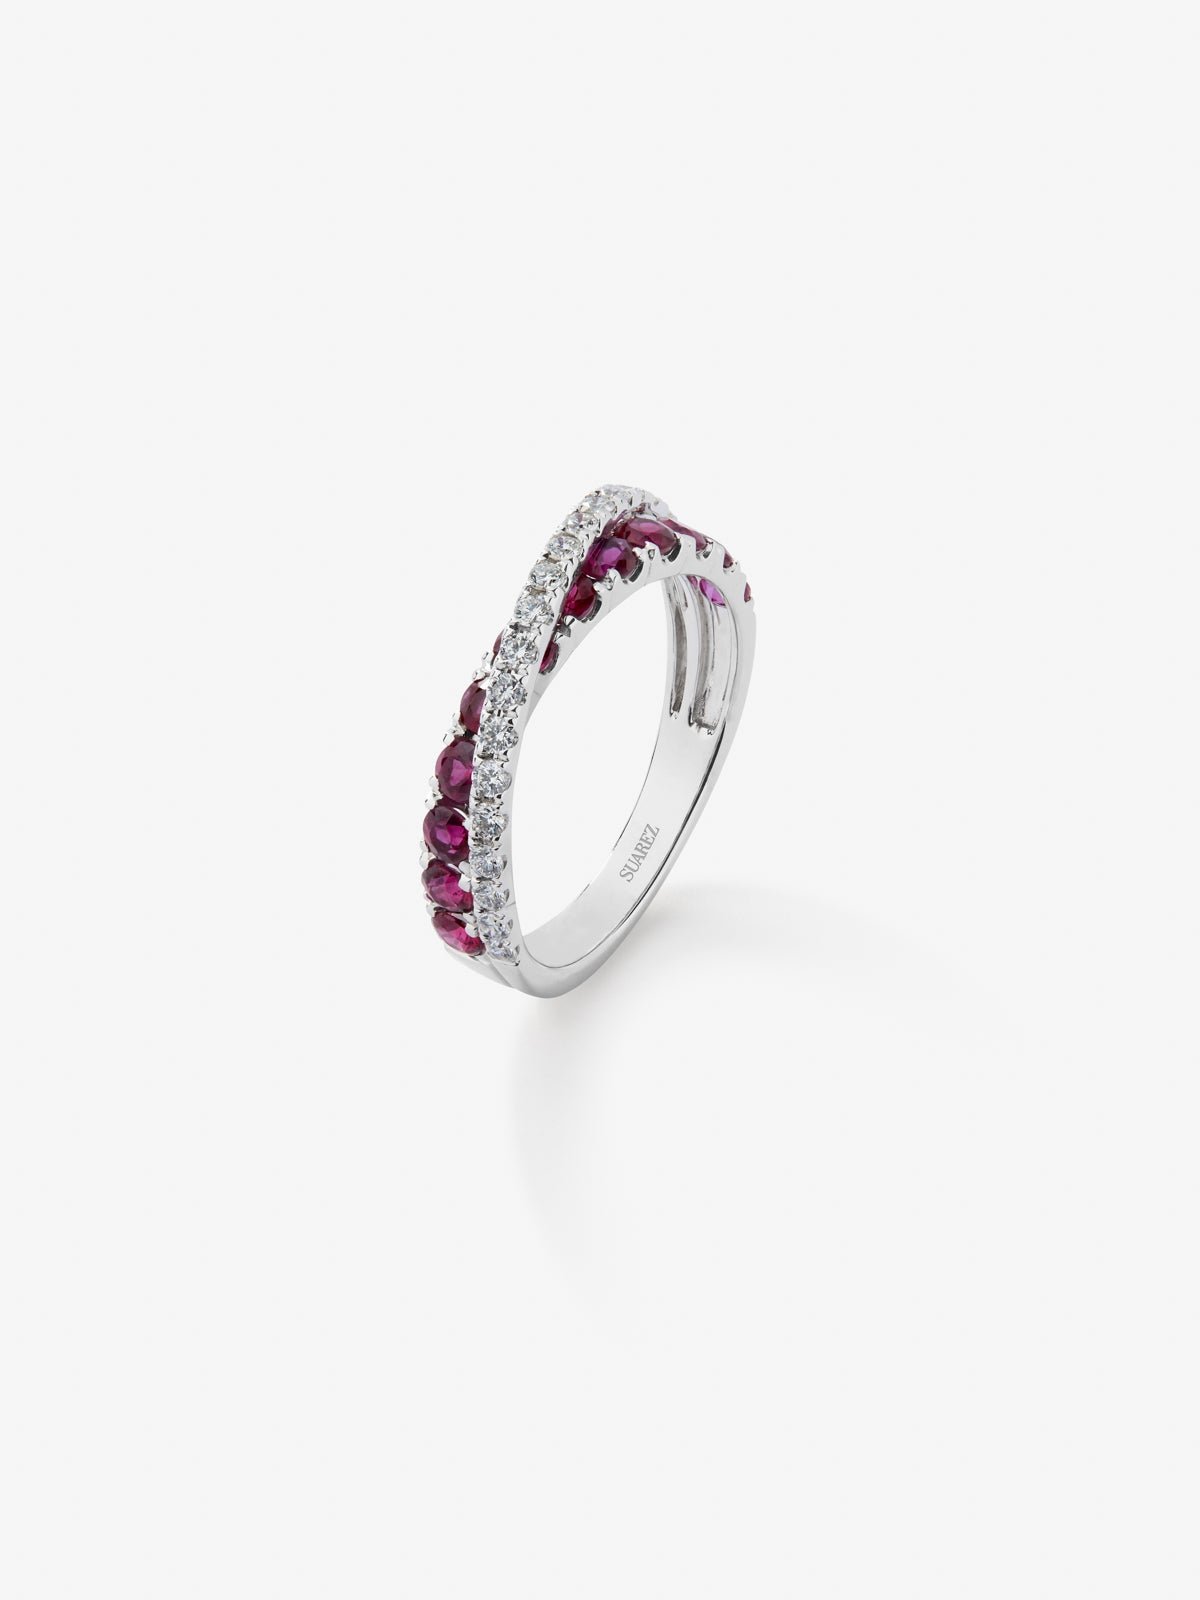 Double crossed ring in 18K white gold with 12 brilliant-cut rubies with a total of 0.95 cts and 20 brilliant-cut diamonds with a total of 0.33 cts